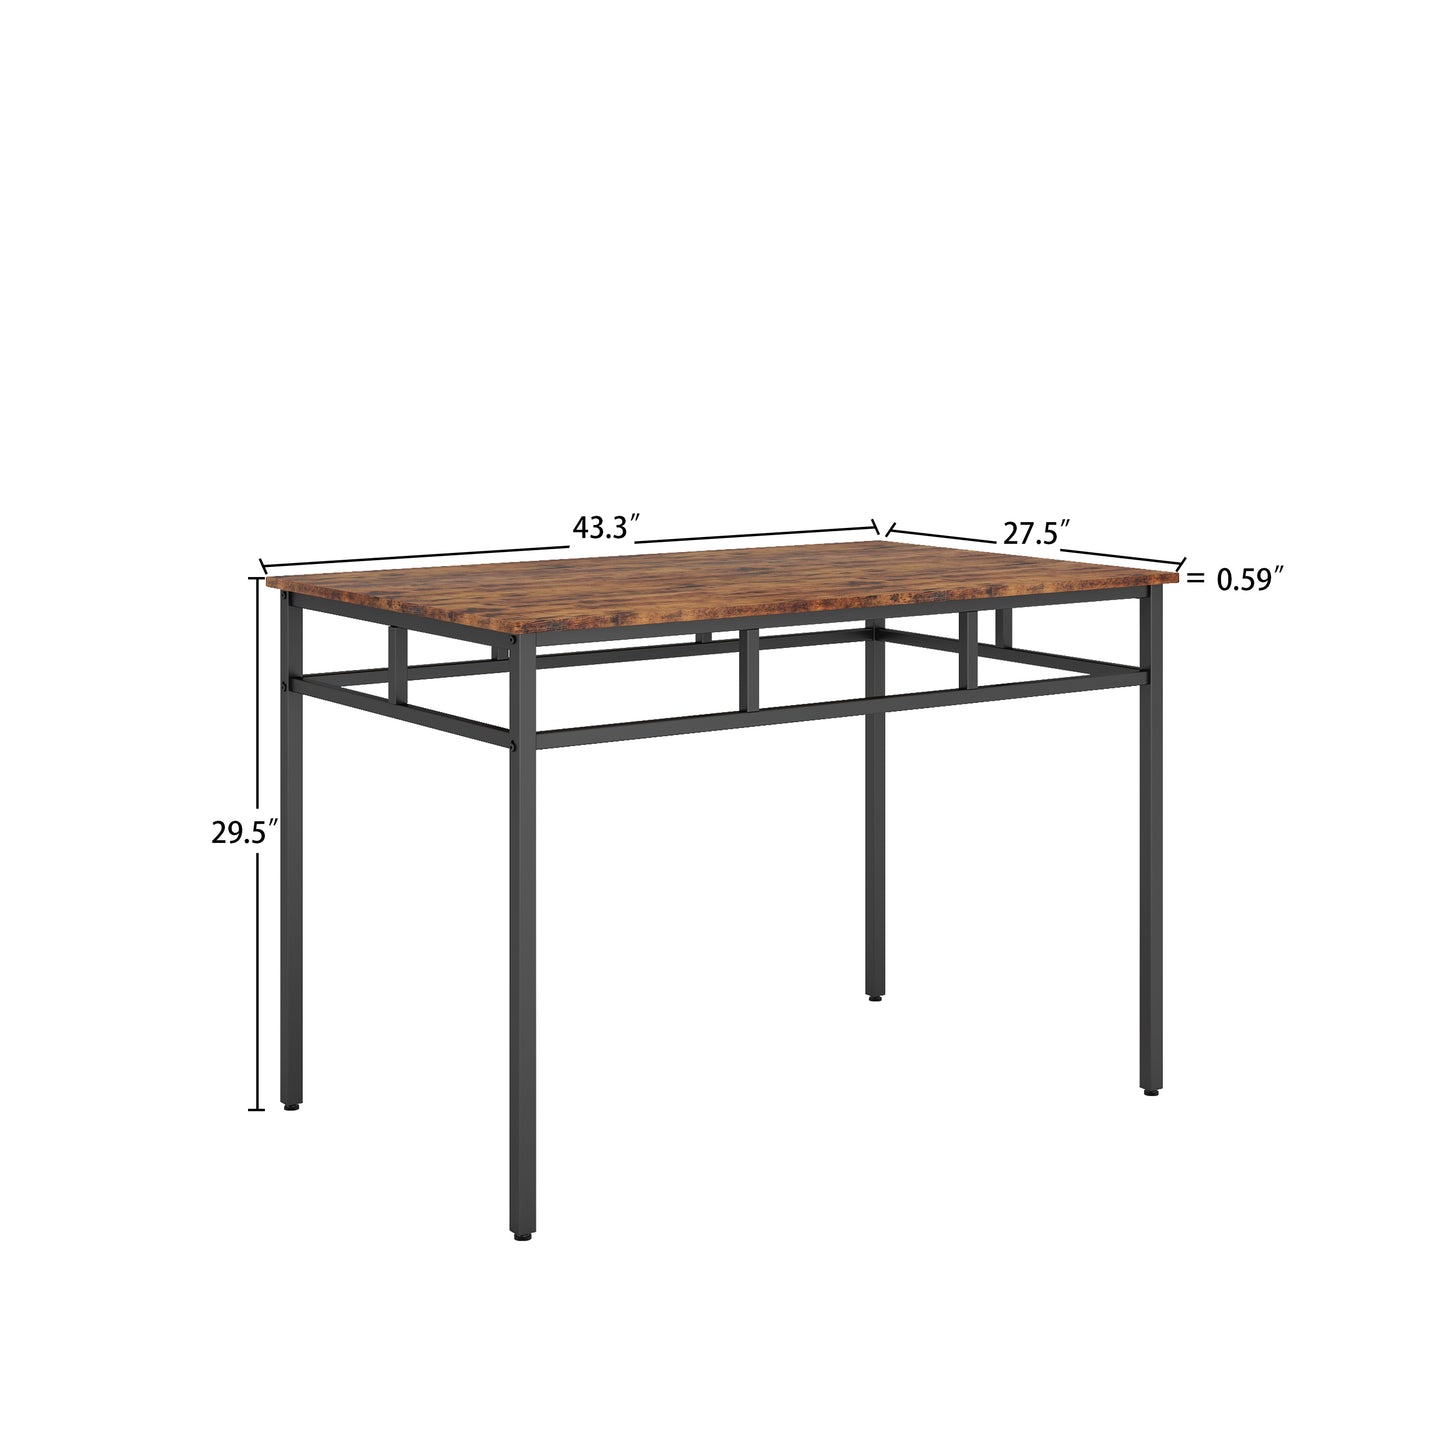 Dining table set 3PC, structural strengthening, industrial style (Rustic Brown, 43.31" W x 27.56"d x 29.53" H)